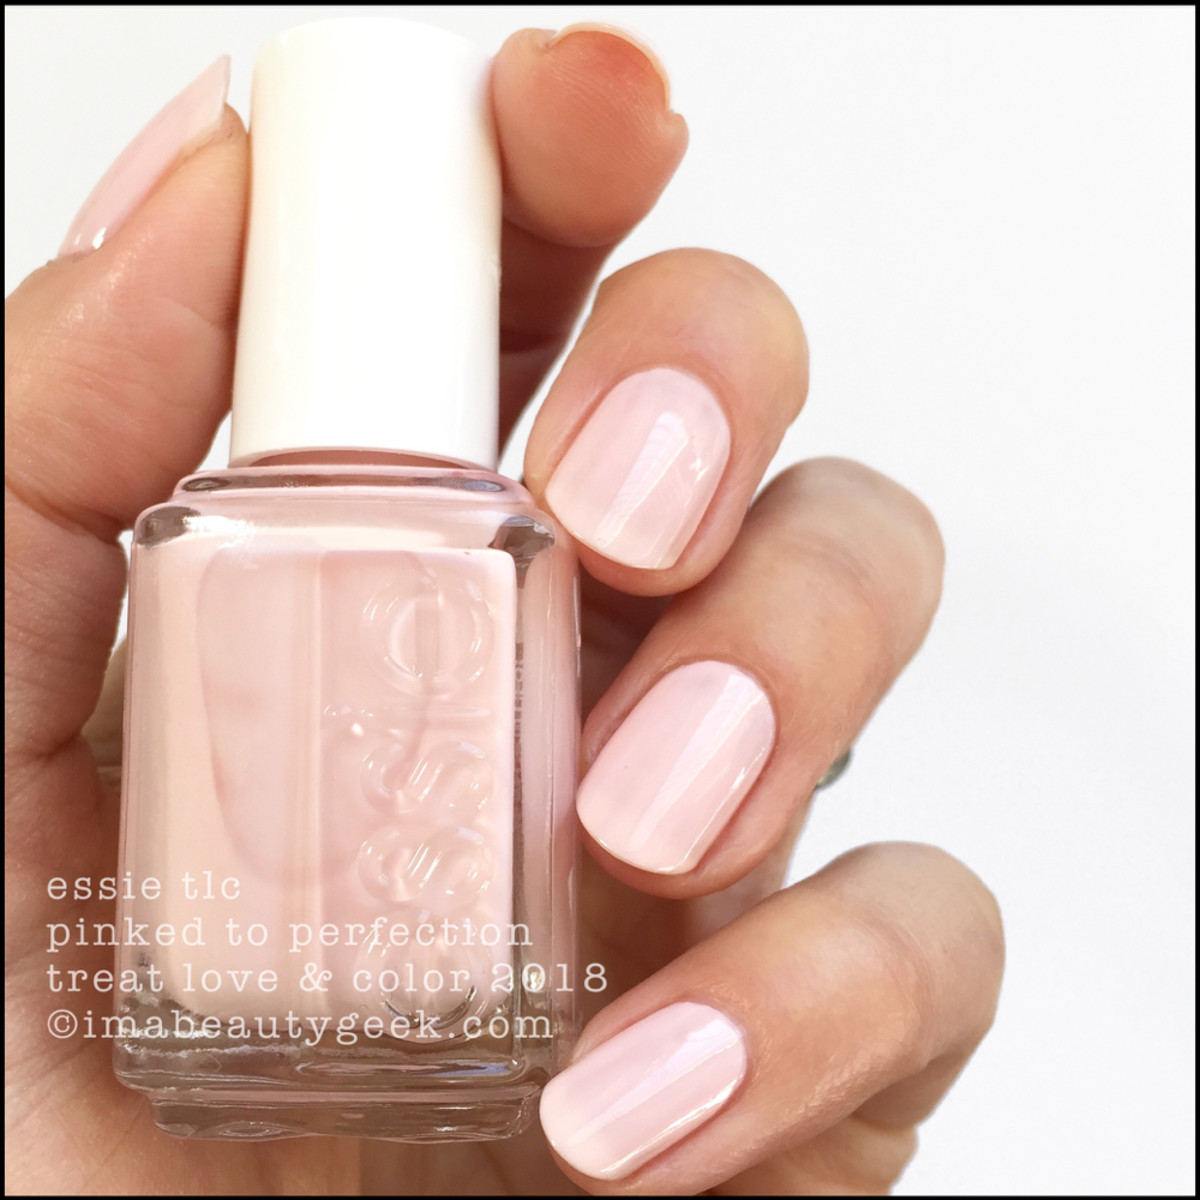 Essie TLC Pinked to Perfection _ Essie Treat Love Color Swatches 2018 Shade Expansion